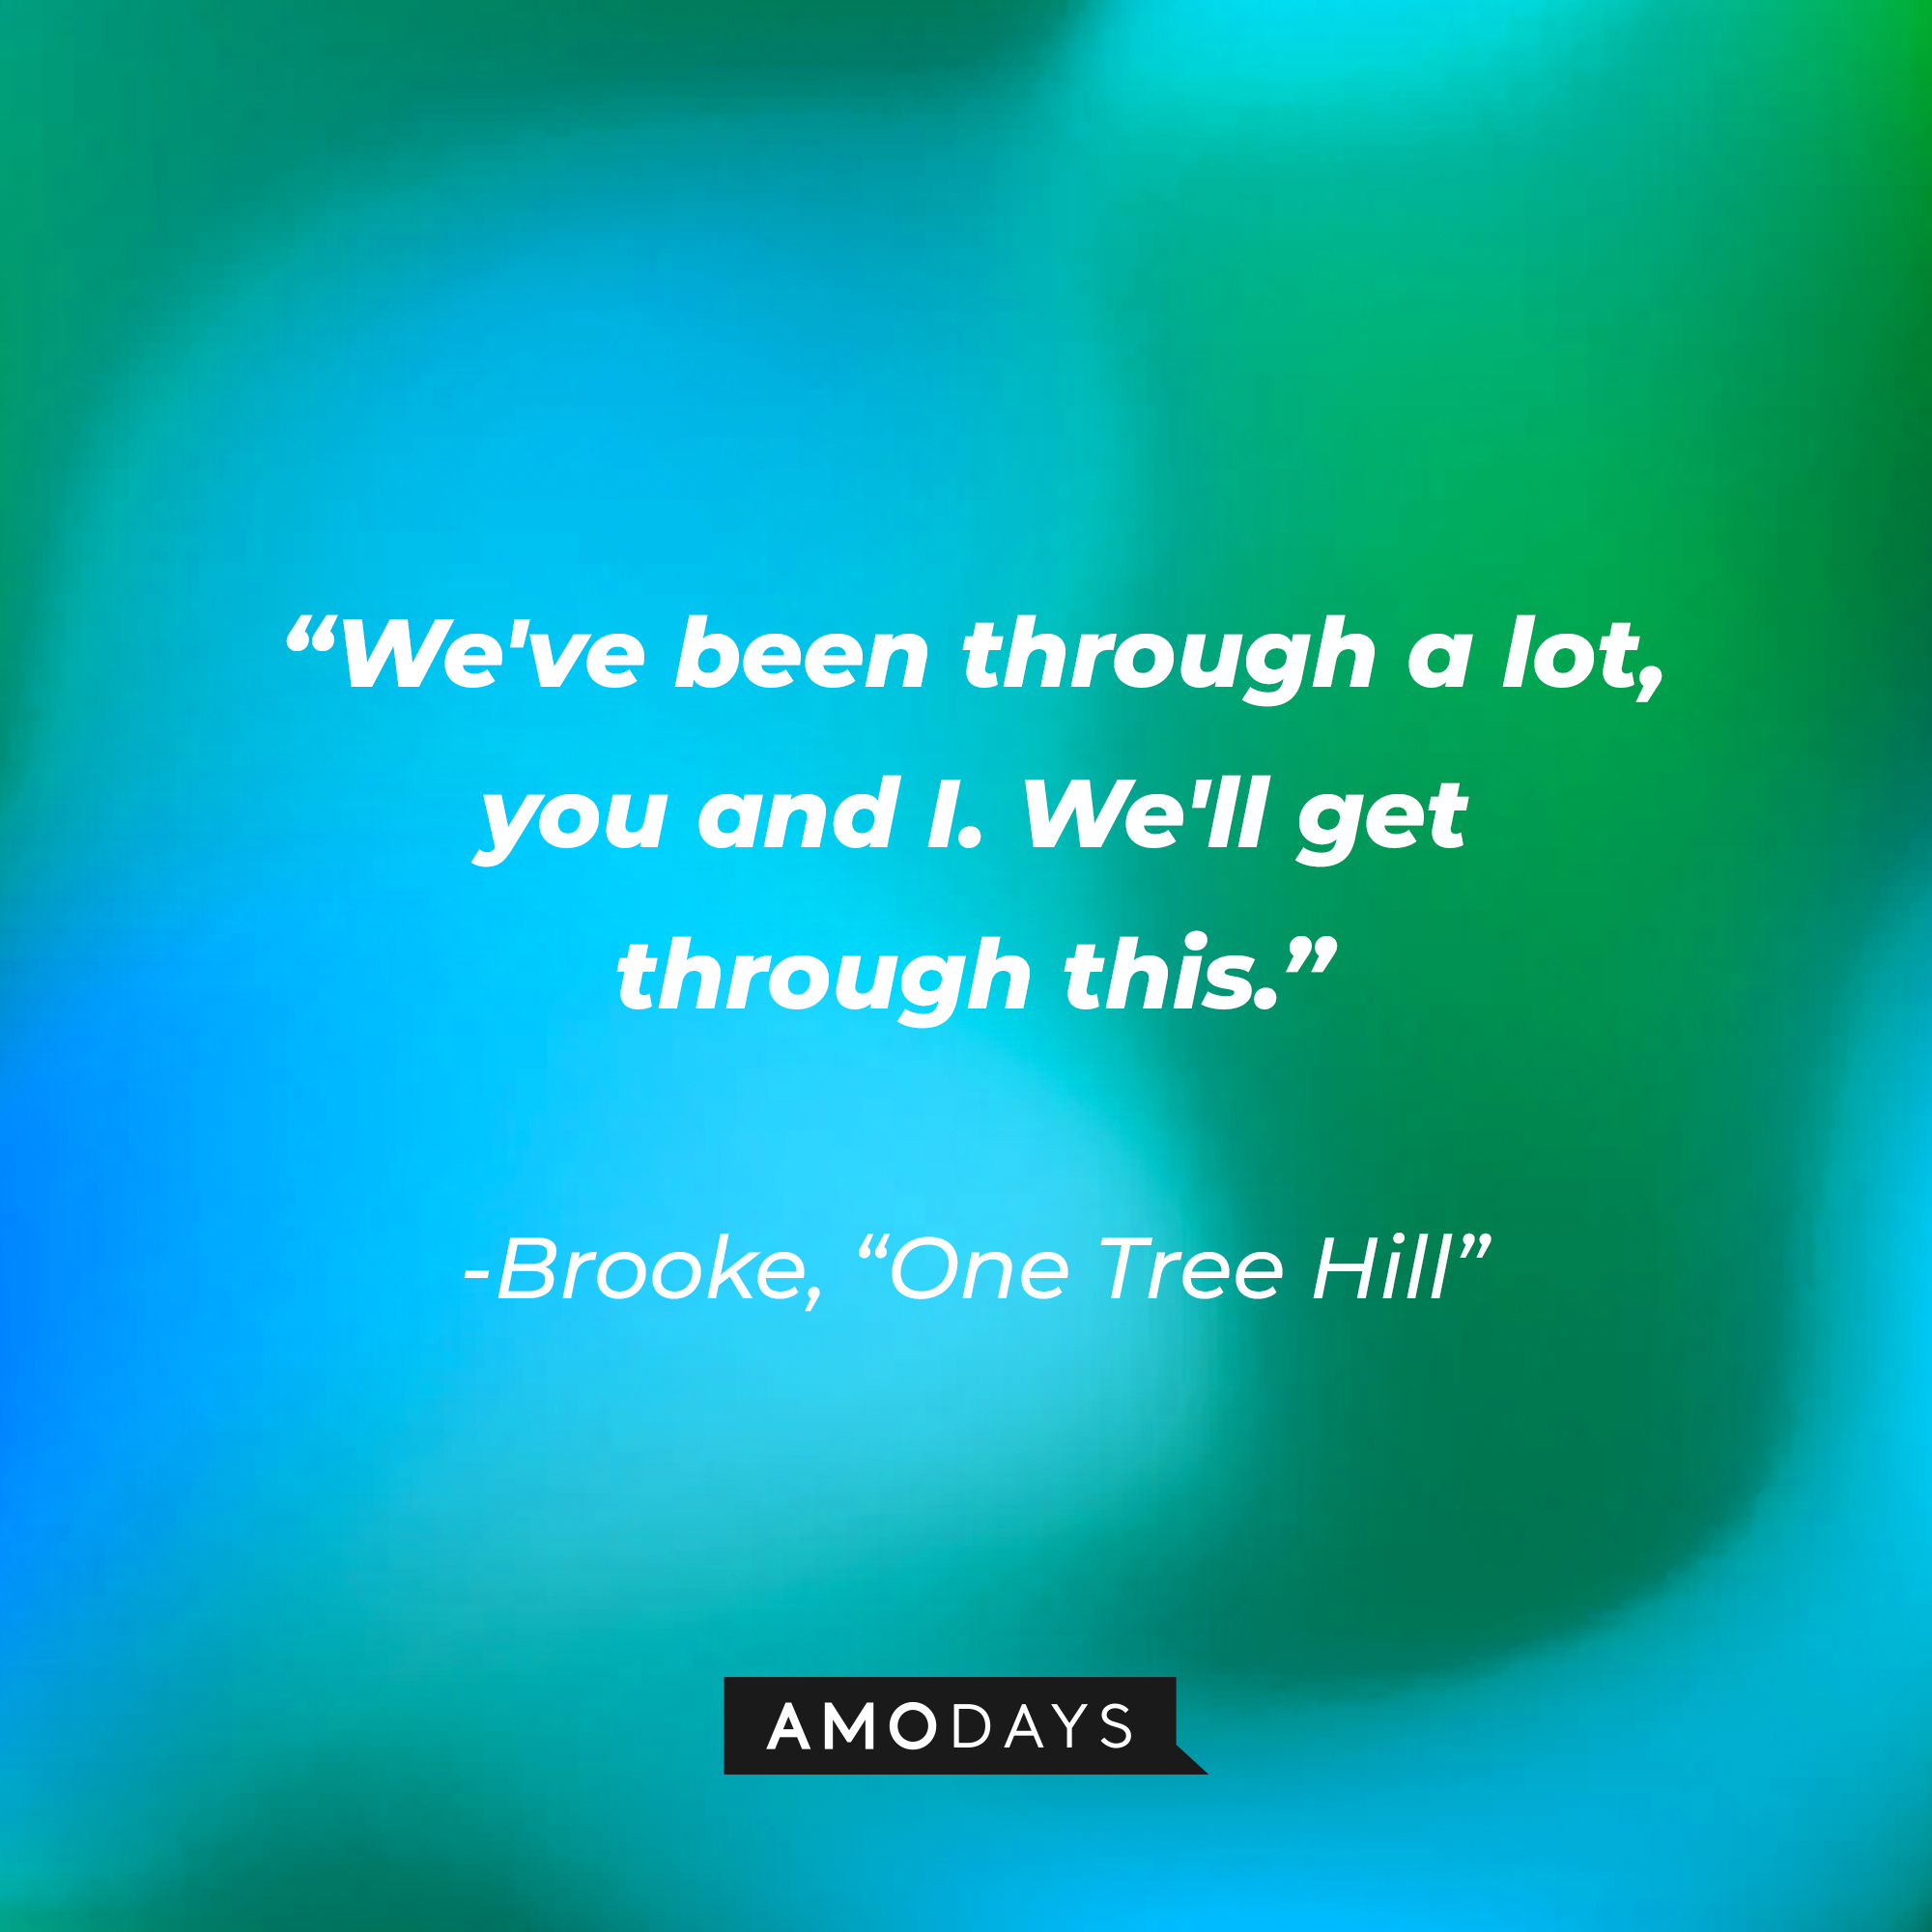 Brooke’s quote from “One Tree Hill”: “We've been through a lot, you and I. We'll get through this.” | Source: AmoDays